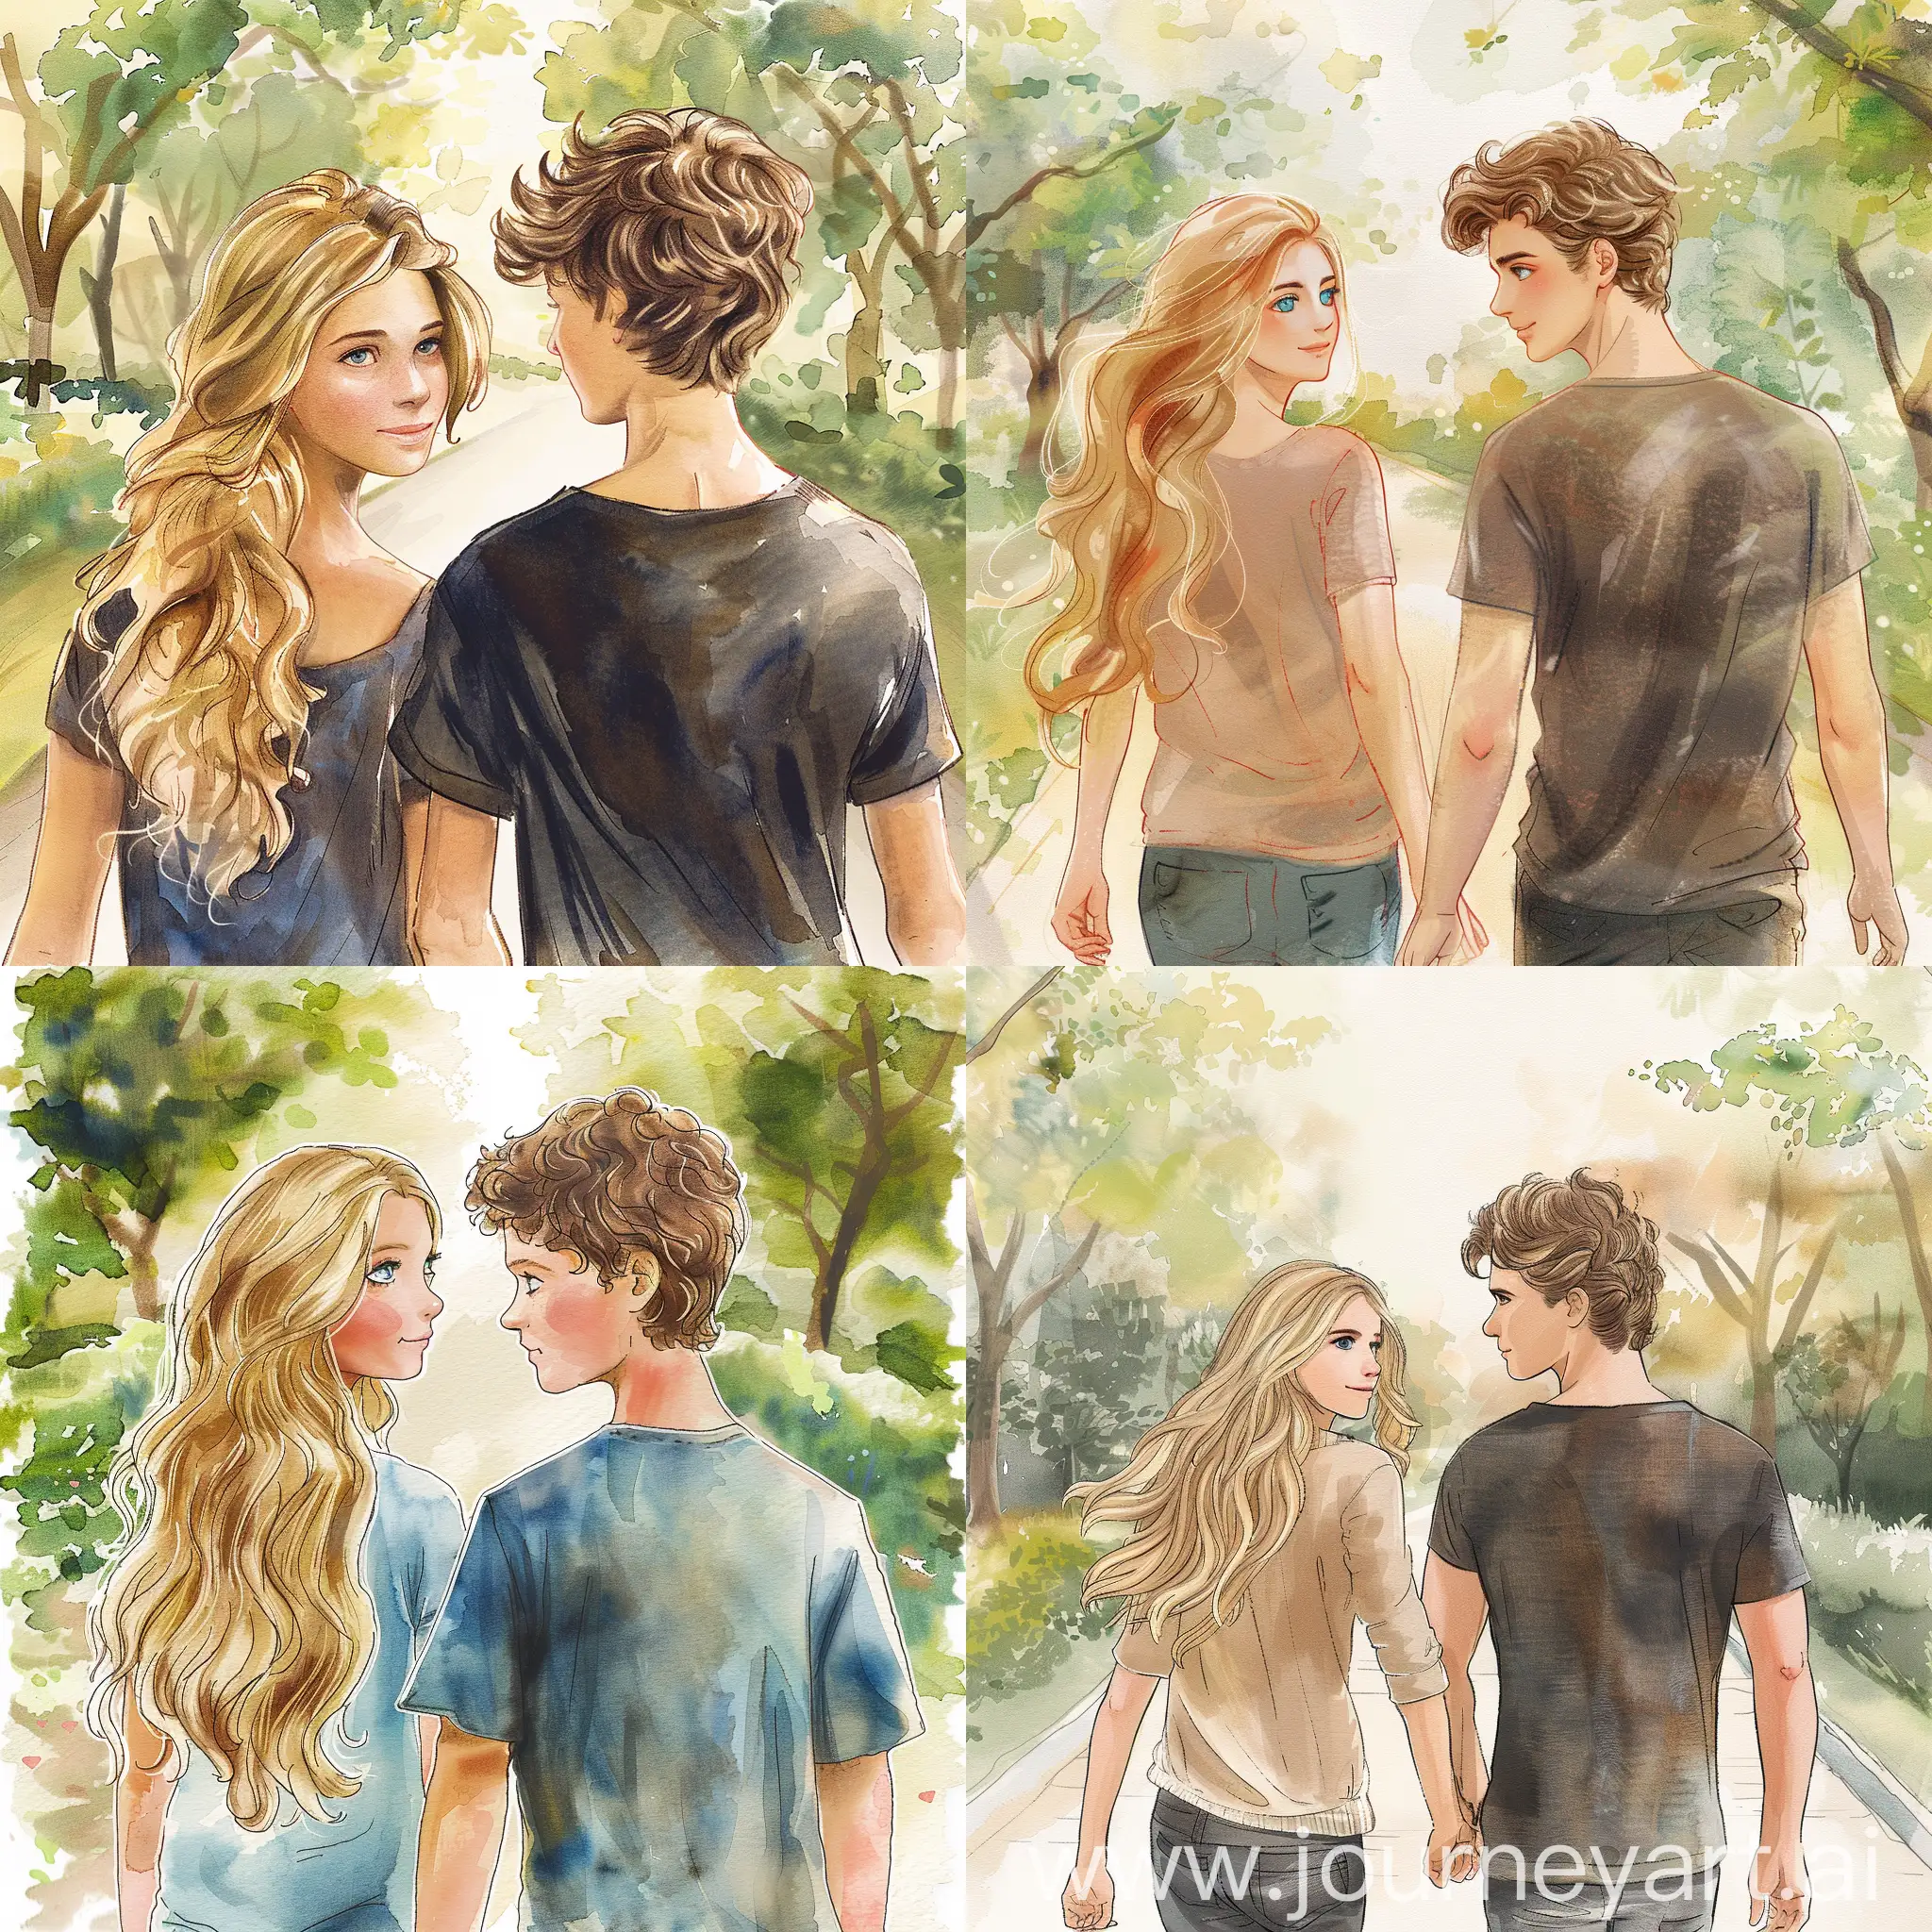 Adorable-Couple-Strolling-in-Park-Childrens-Book-Style-Watercolor-Illustration